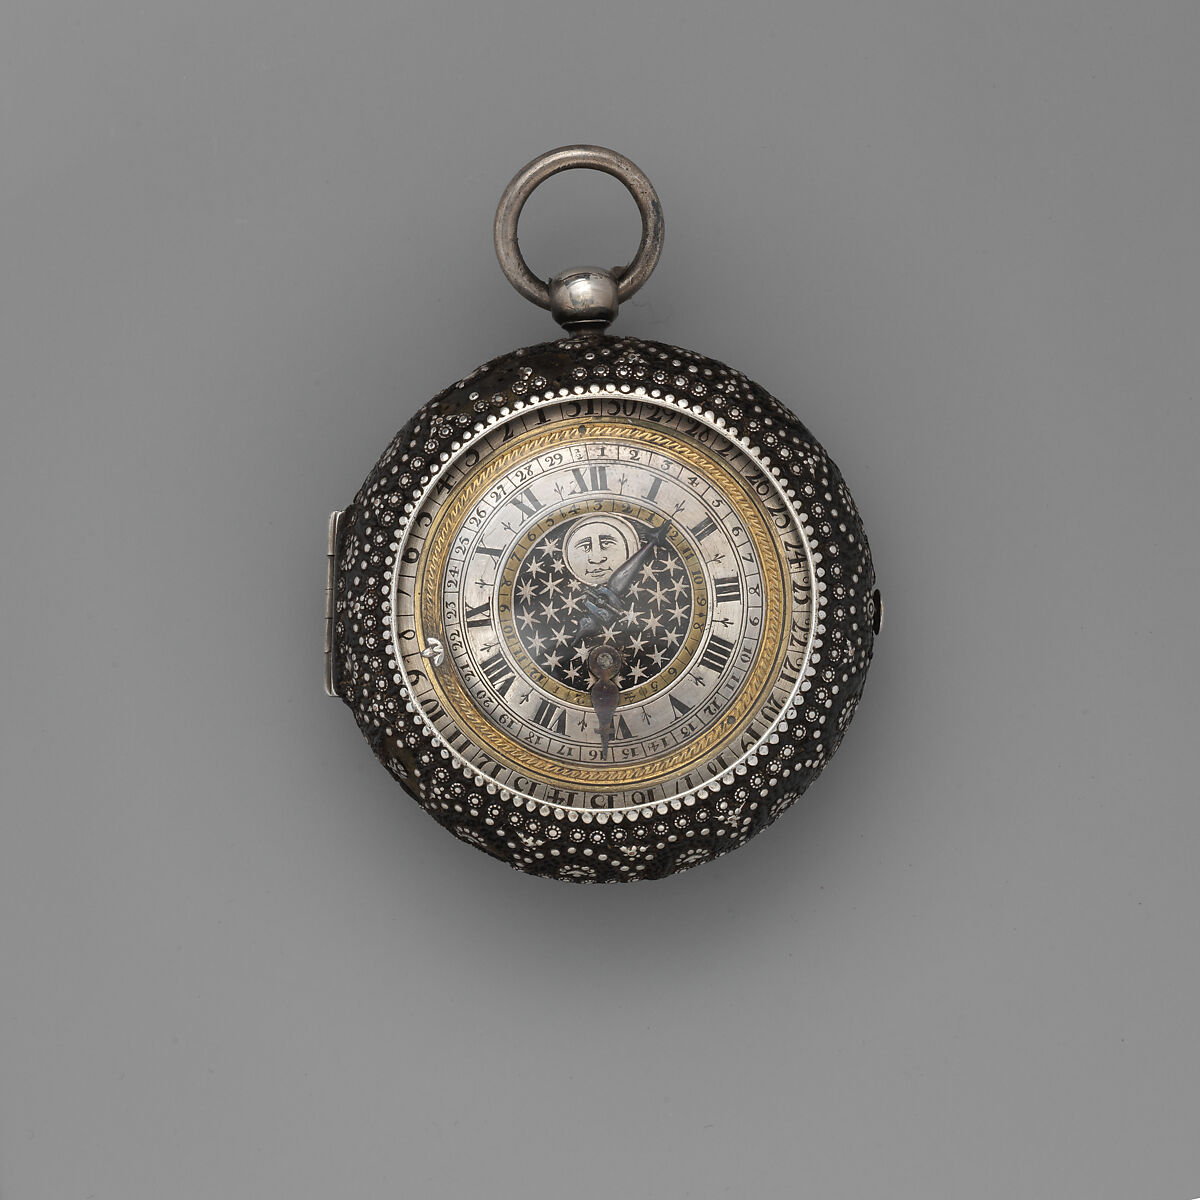 Calendar watch, Watchmaker: Thomas Alcock (recorded working 1630, Clockmakers’ Company 1632, died before 1688), Outer case: leather-covered silver with silver piqué work; Inner case: silver; Movement: gilt brass, steel, partly blued, and silver, British, London 